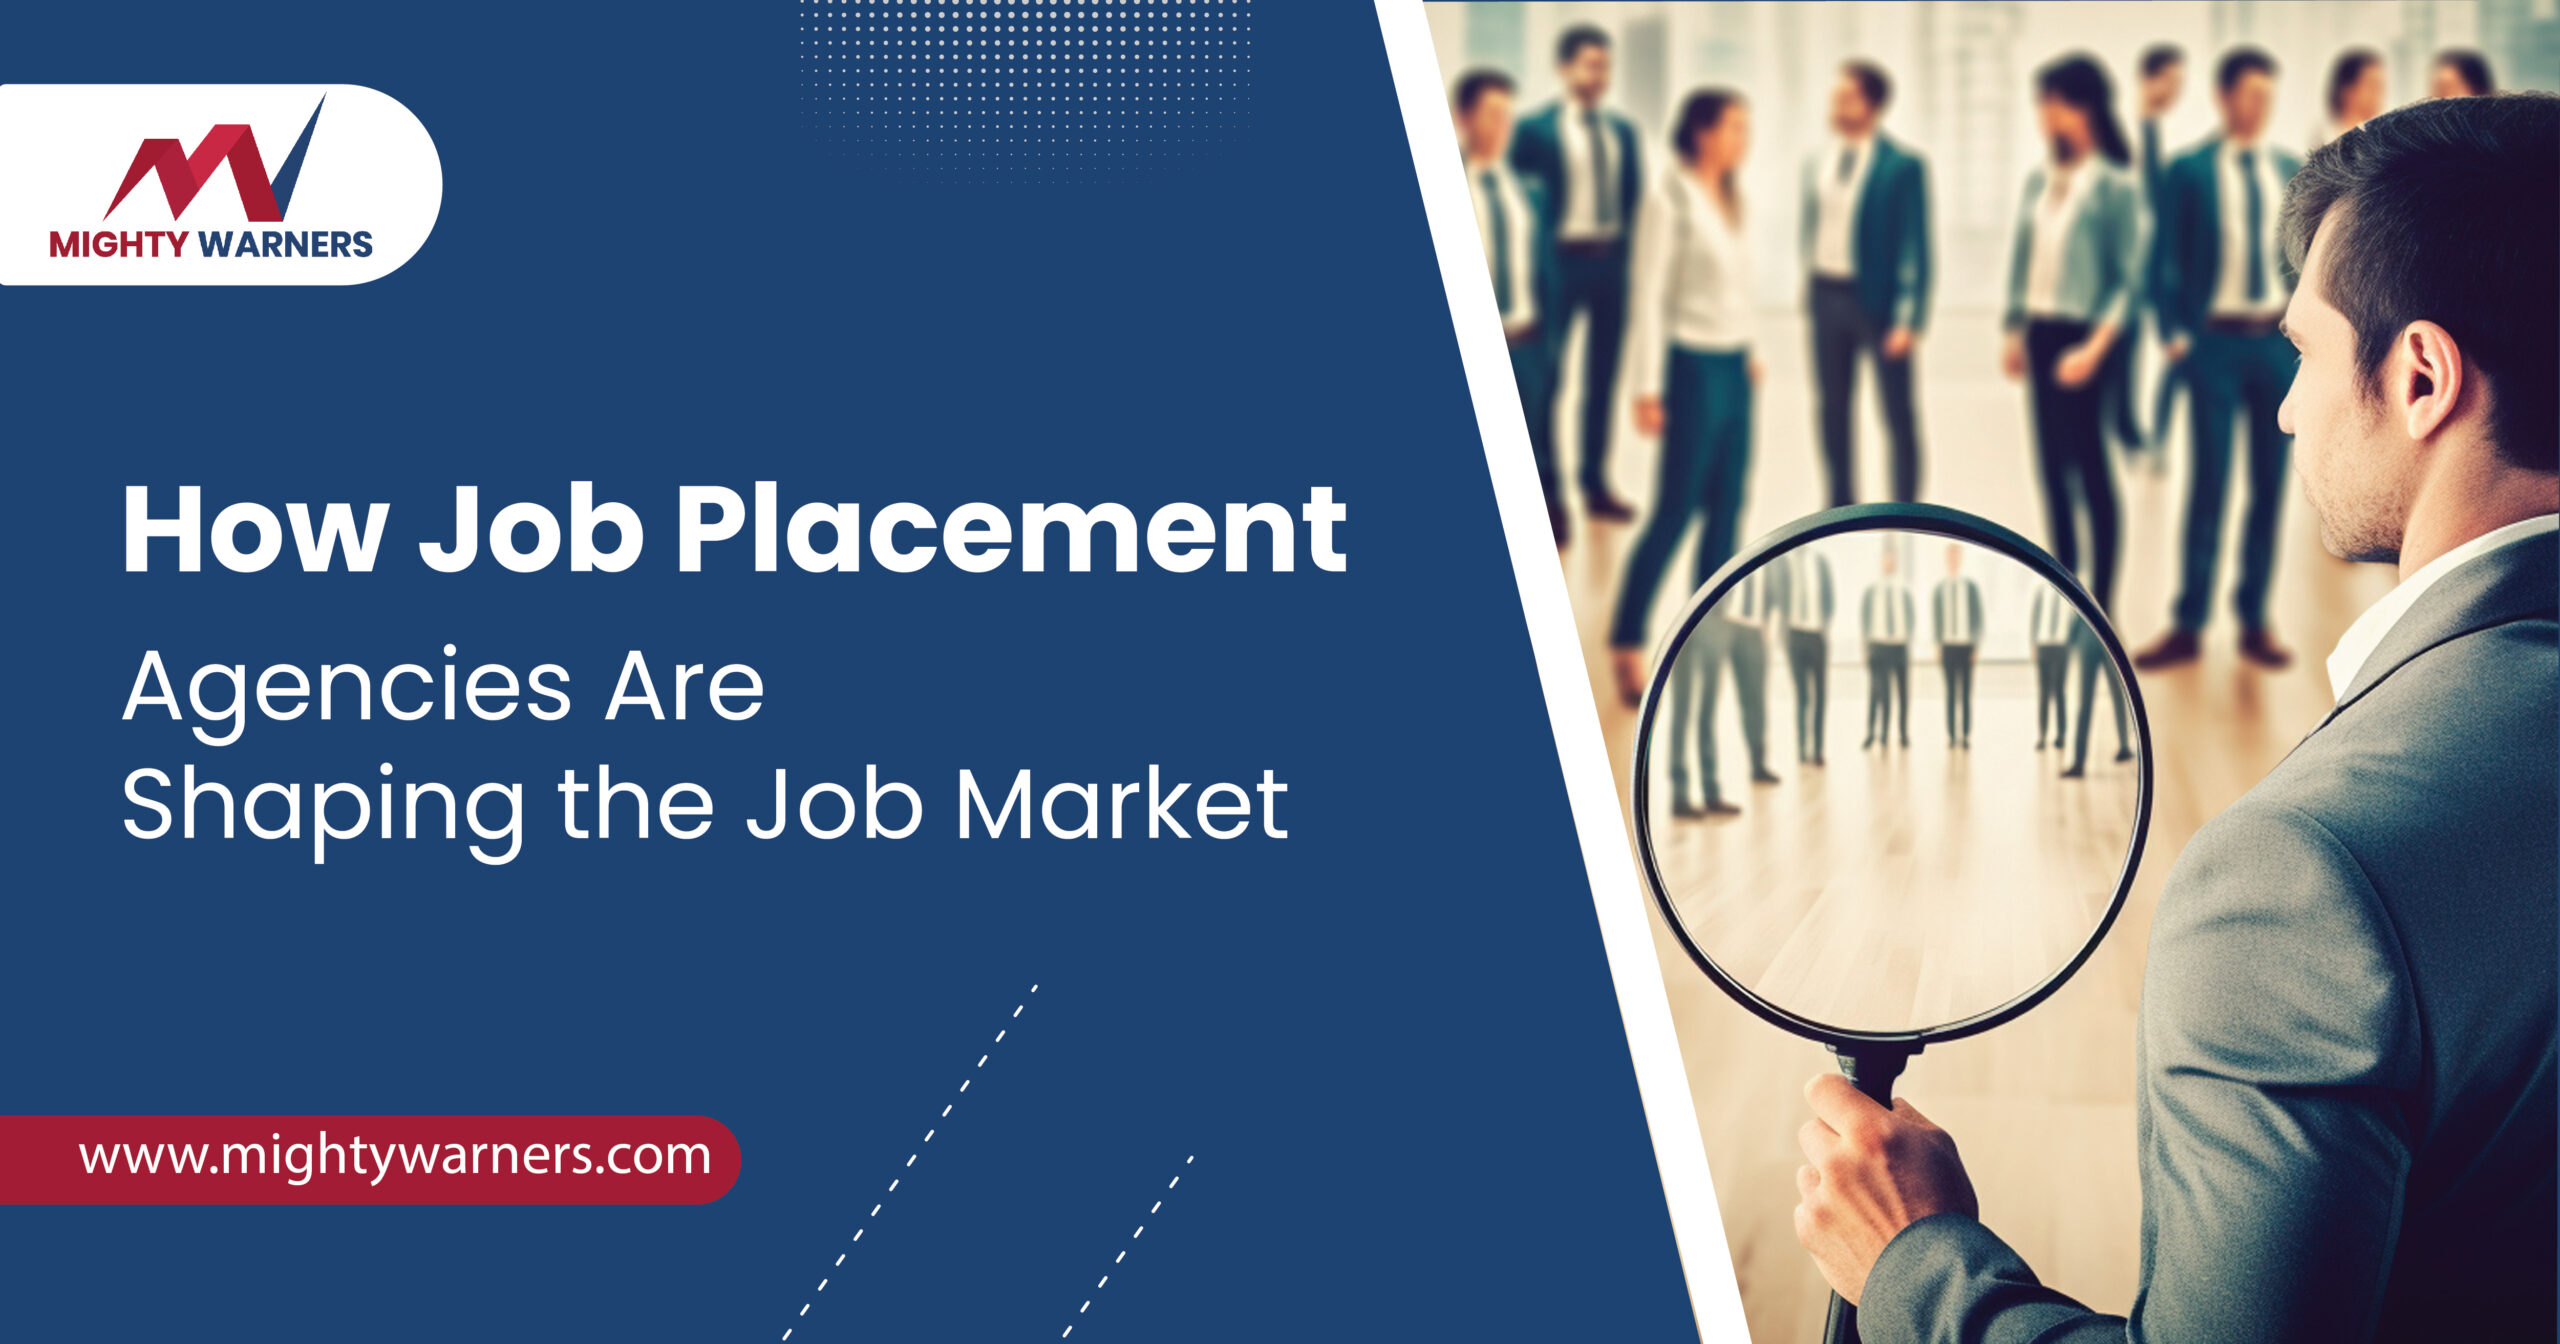 The Future of Employment: How Job Placement Agencies Are Shaping the Job Market